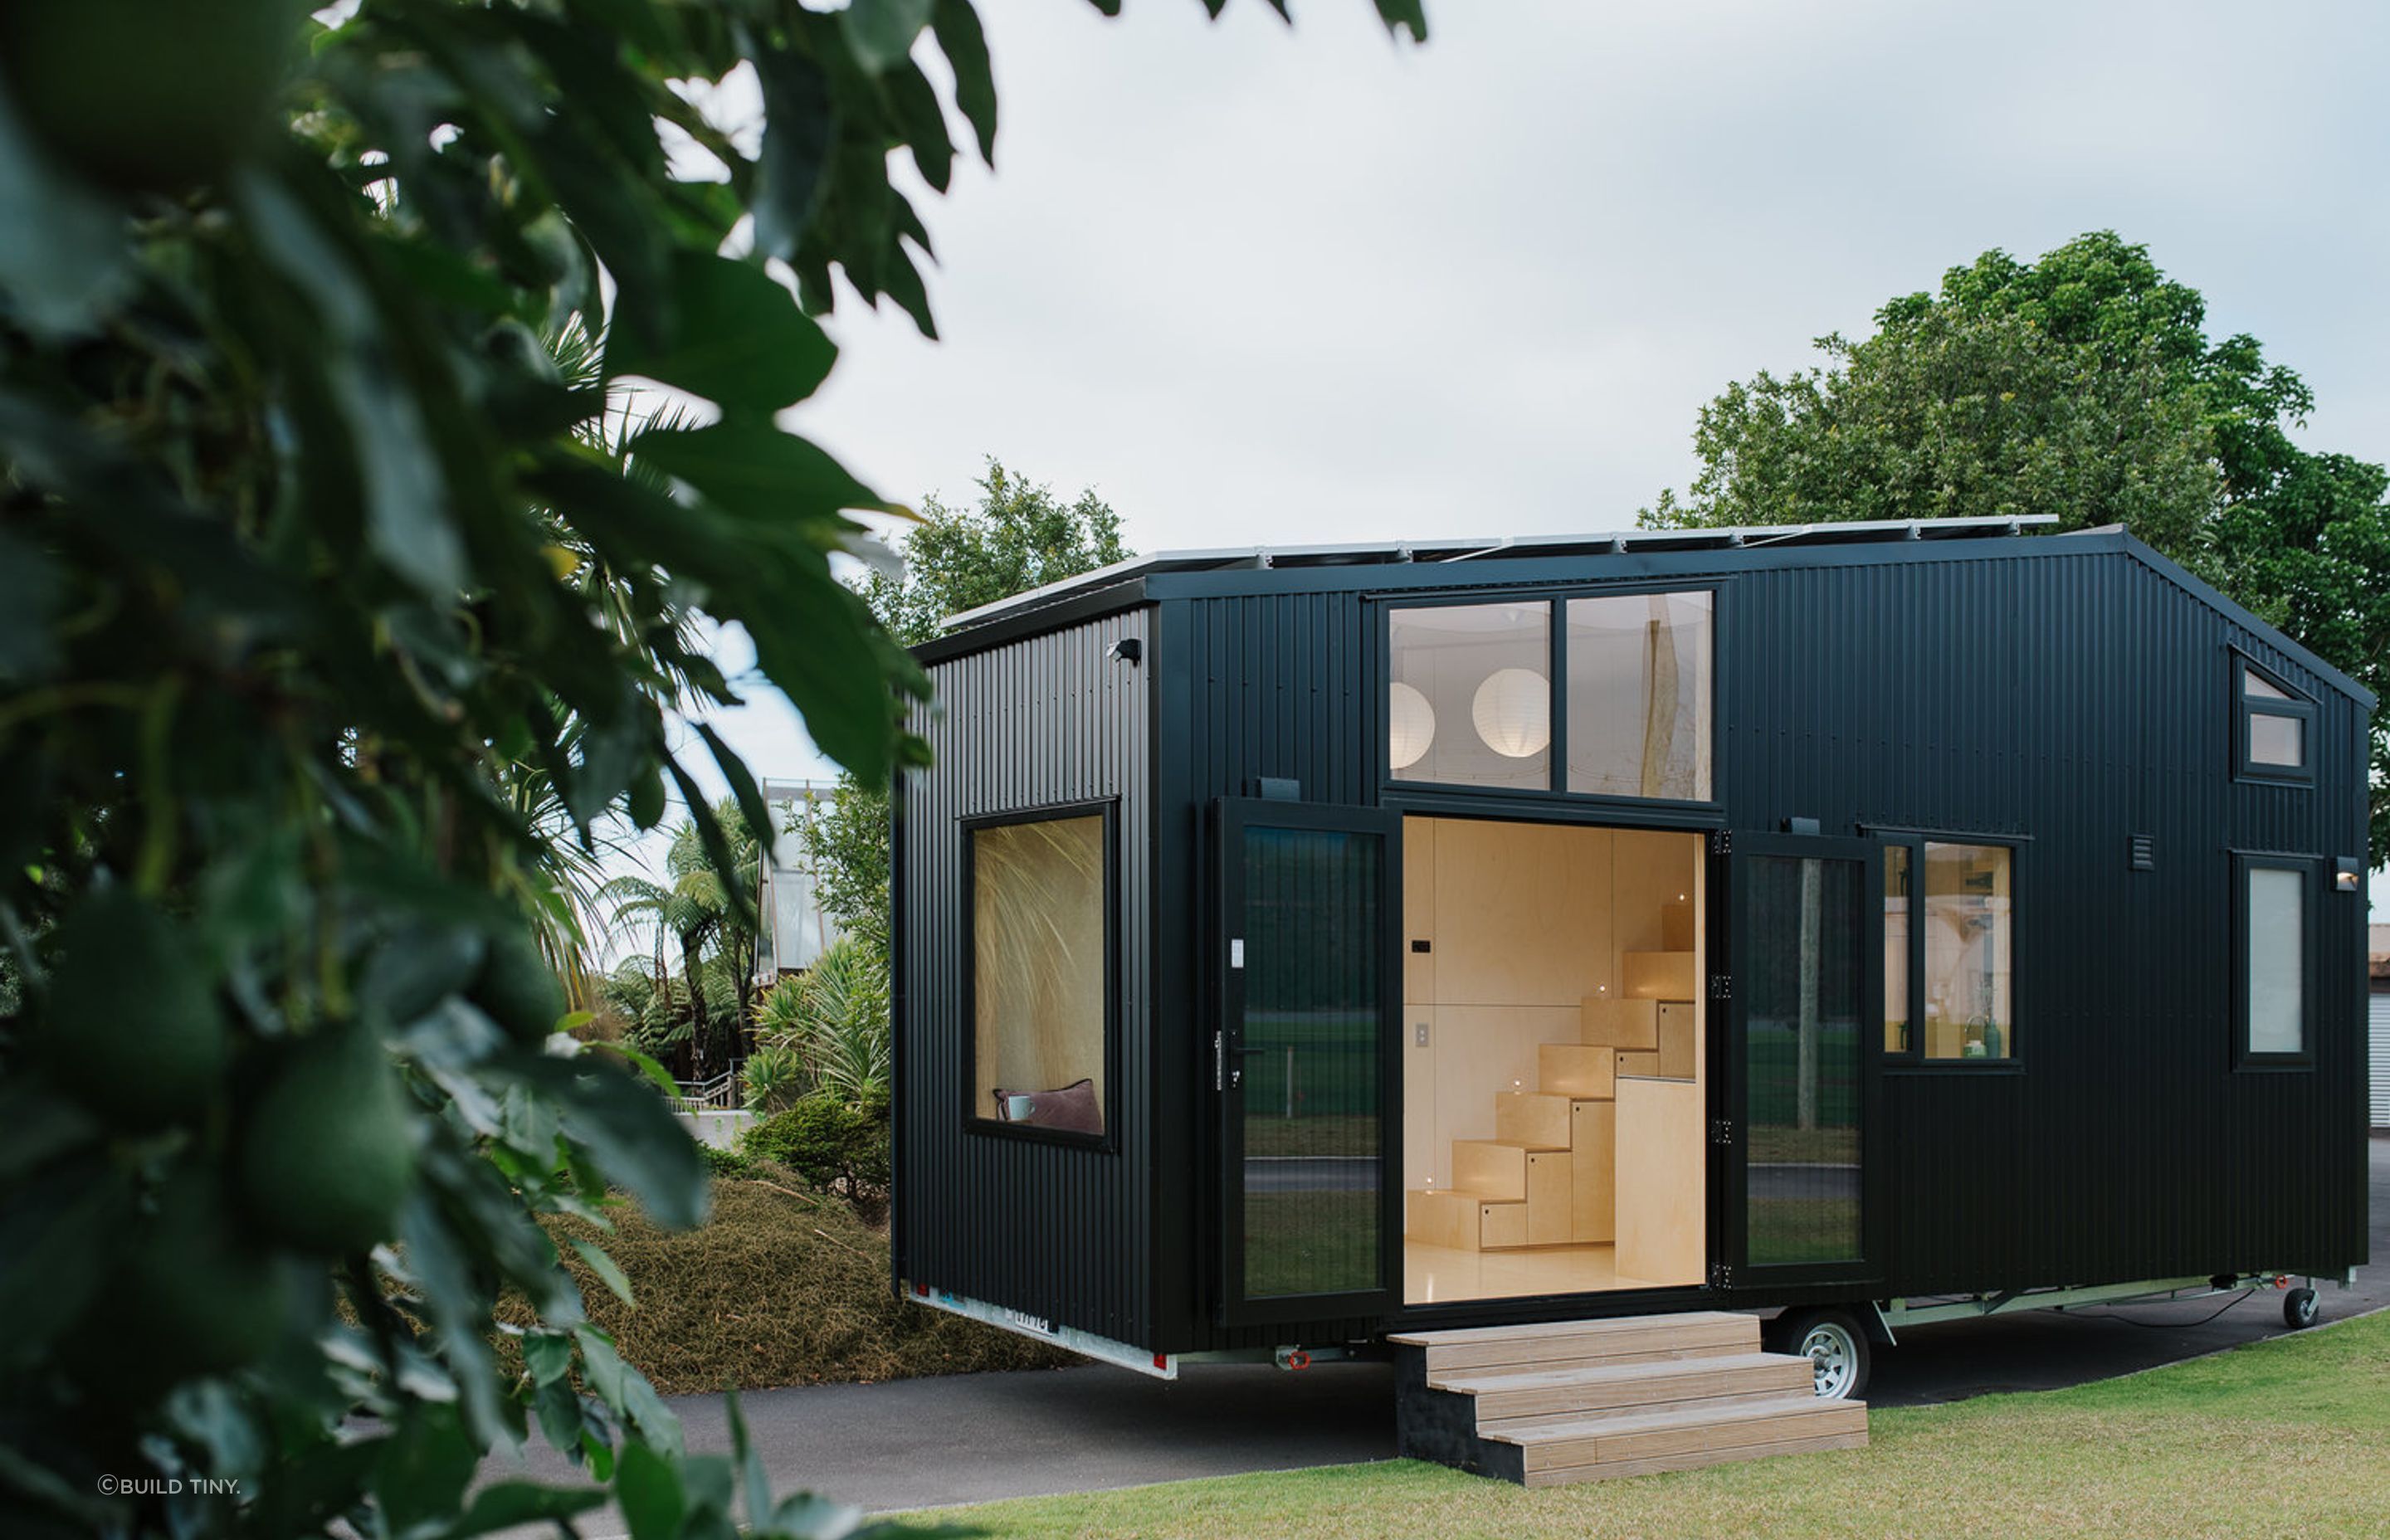 FL Tiny House opens up with French doors and will soon have a timber deck added to create an outdoor entertaining space. Photography supplied by Build Tiny.